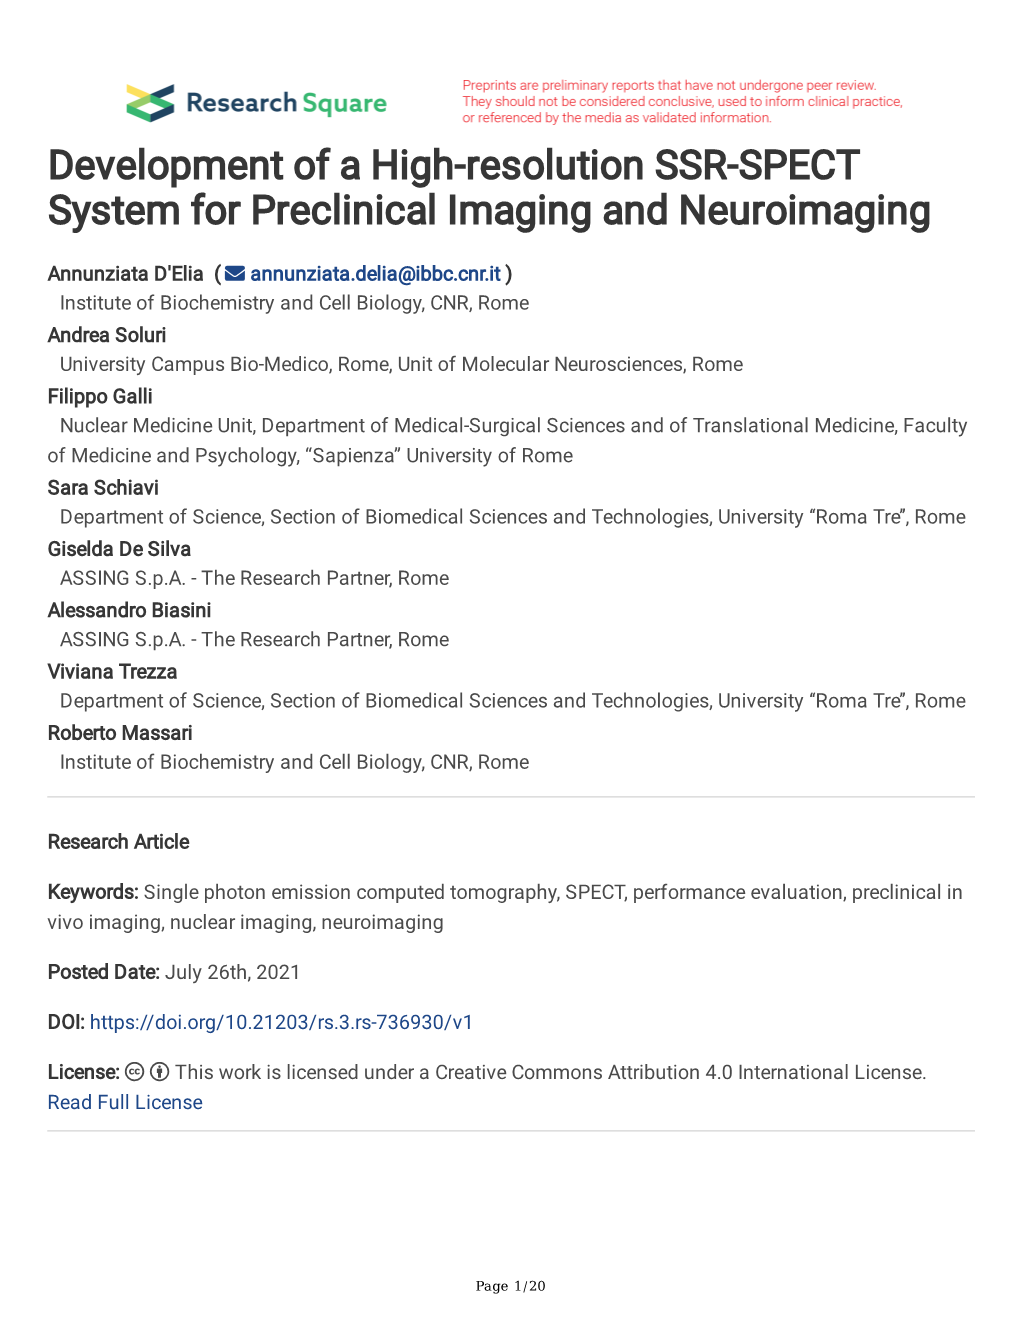 Development of a High-Resolution SSR-SPECT System for Preclinical Imaging and Neuroimaging